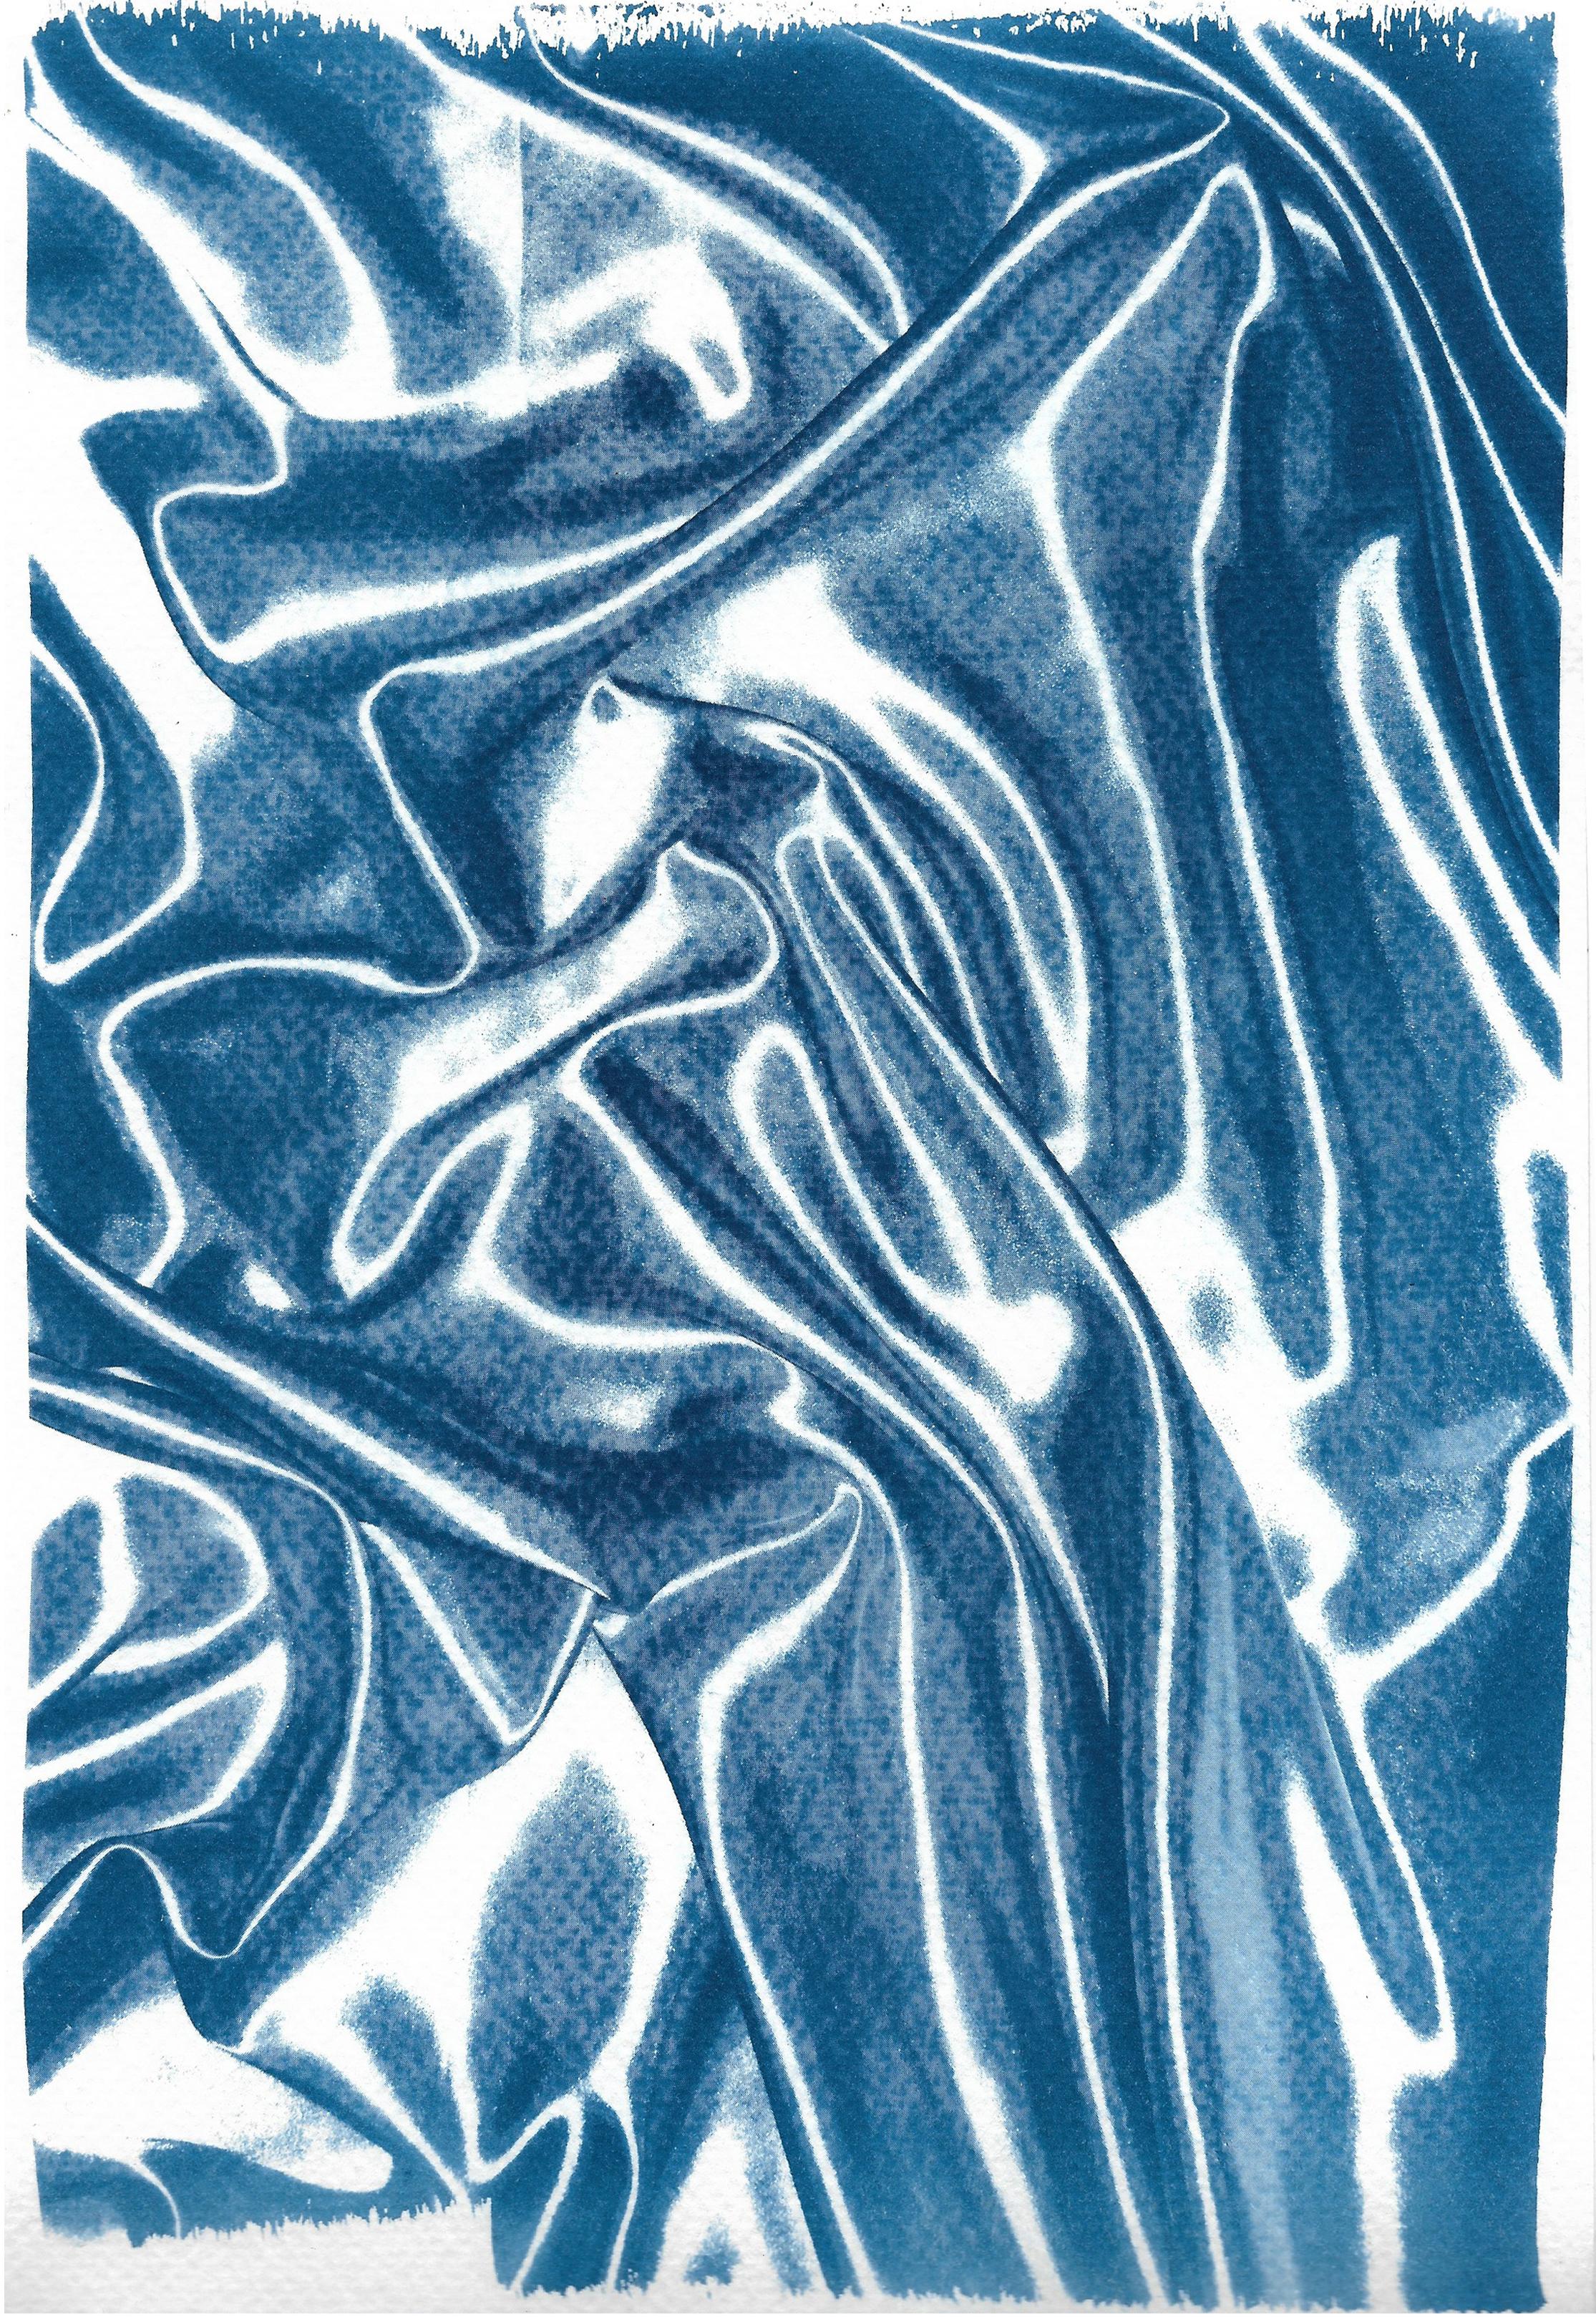 Kind of Cyan Abstract Print - Silk Whisper in Classic Blue, Blueprint on Watercolor Paper, Subtle Memories